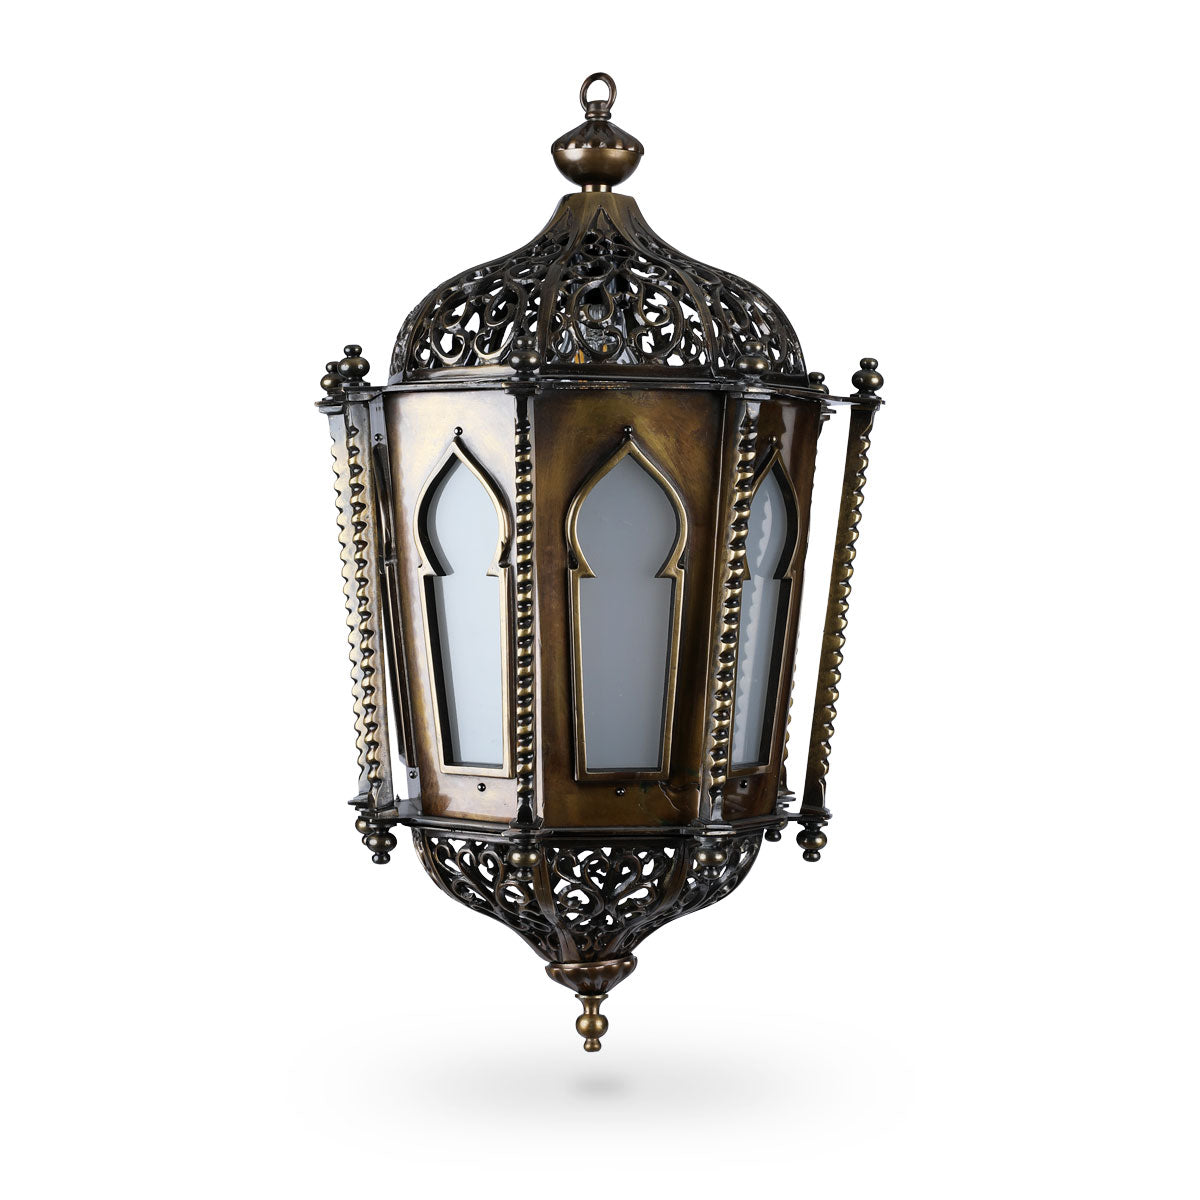 Front View of Syrian Accent Pillared Pendant Light Showcasing Open Arch Cutwork & Brass Metalwork